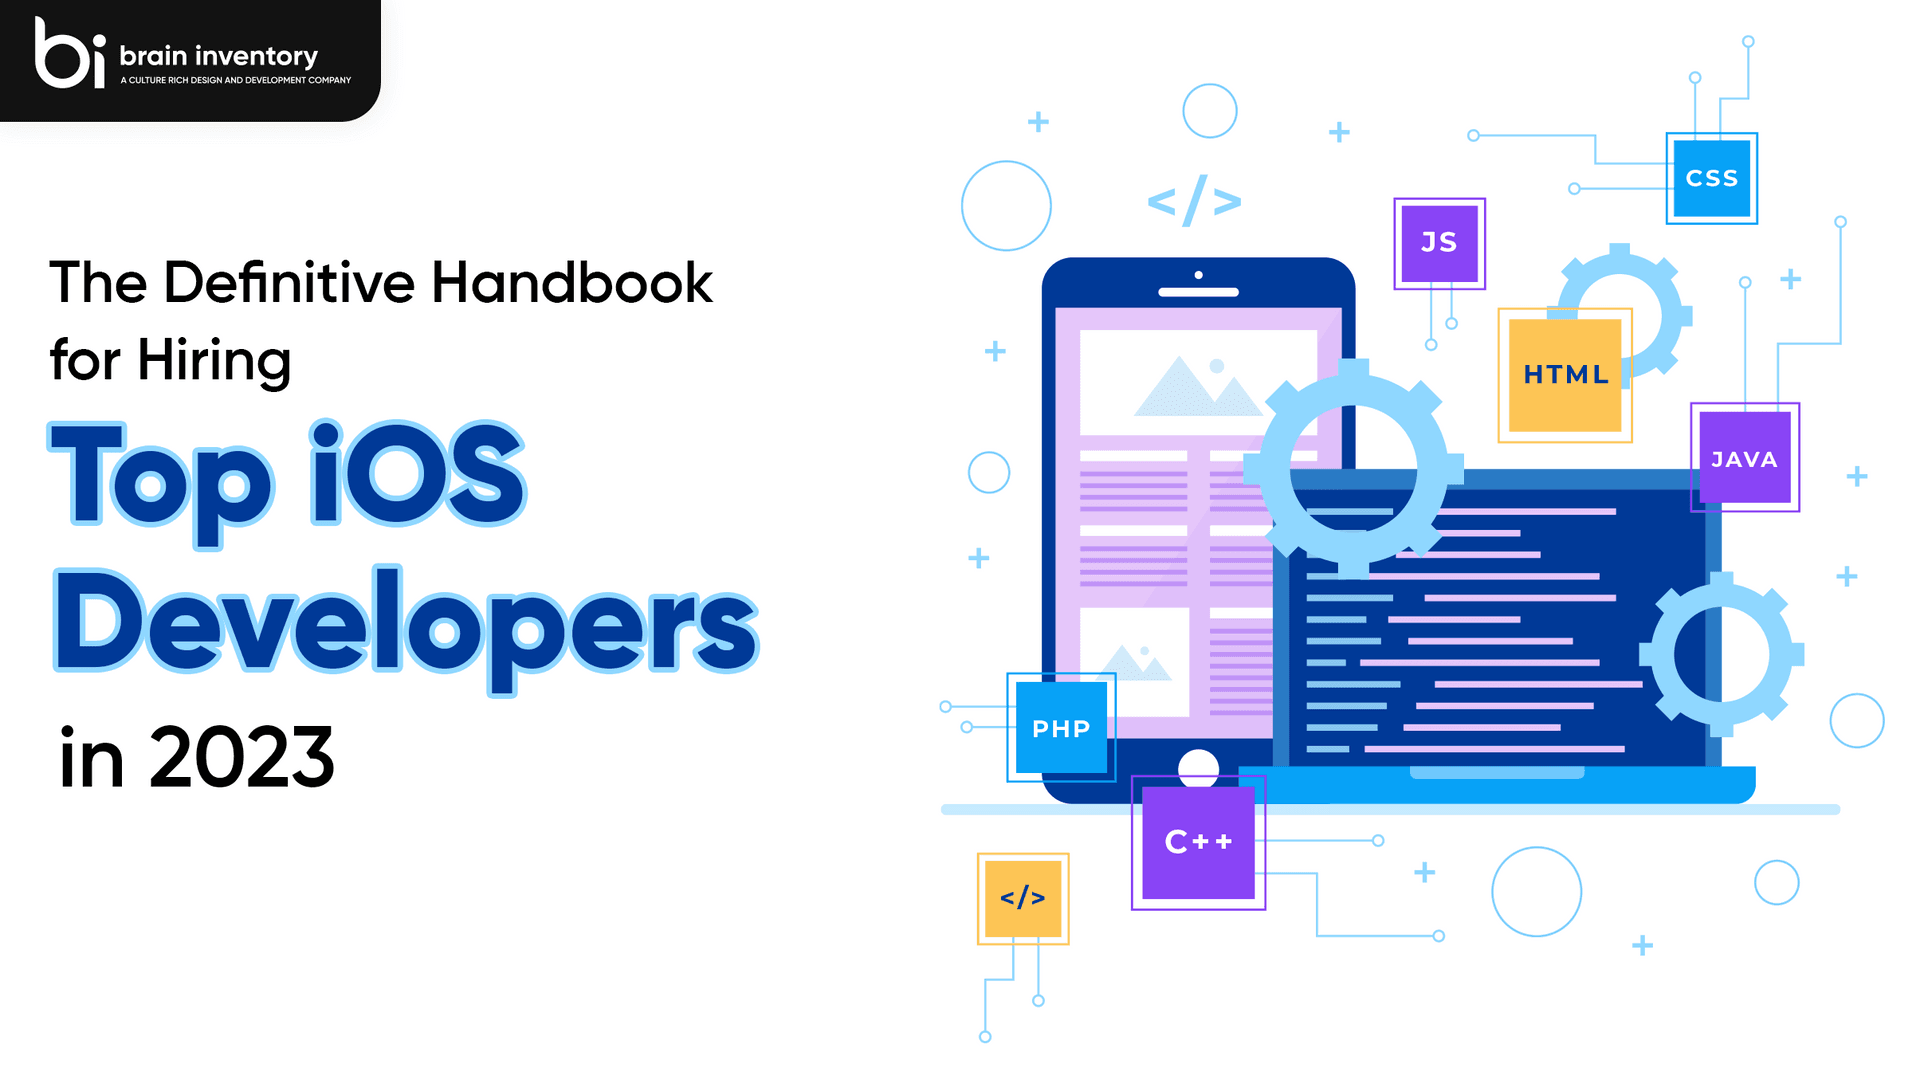 The Definitive Handbook for Hiring Top iOS Developers in 2023